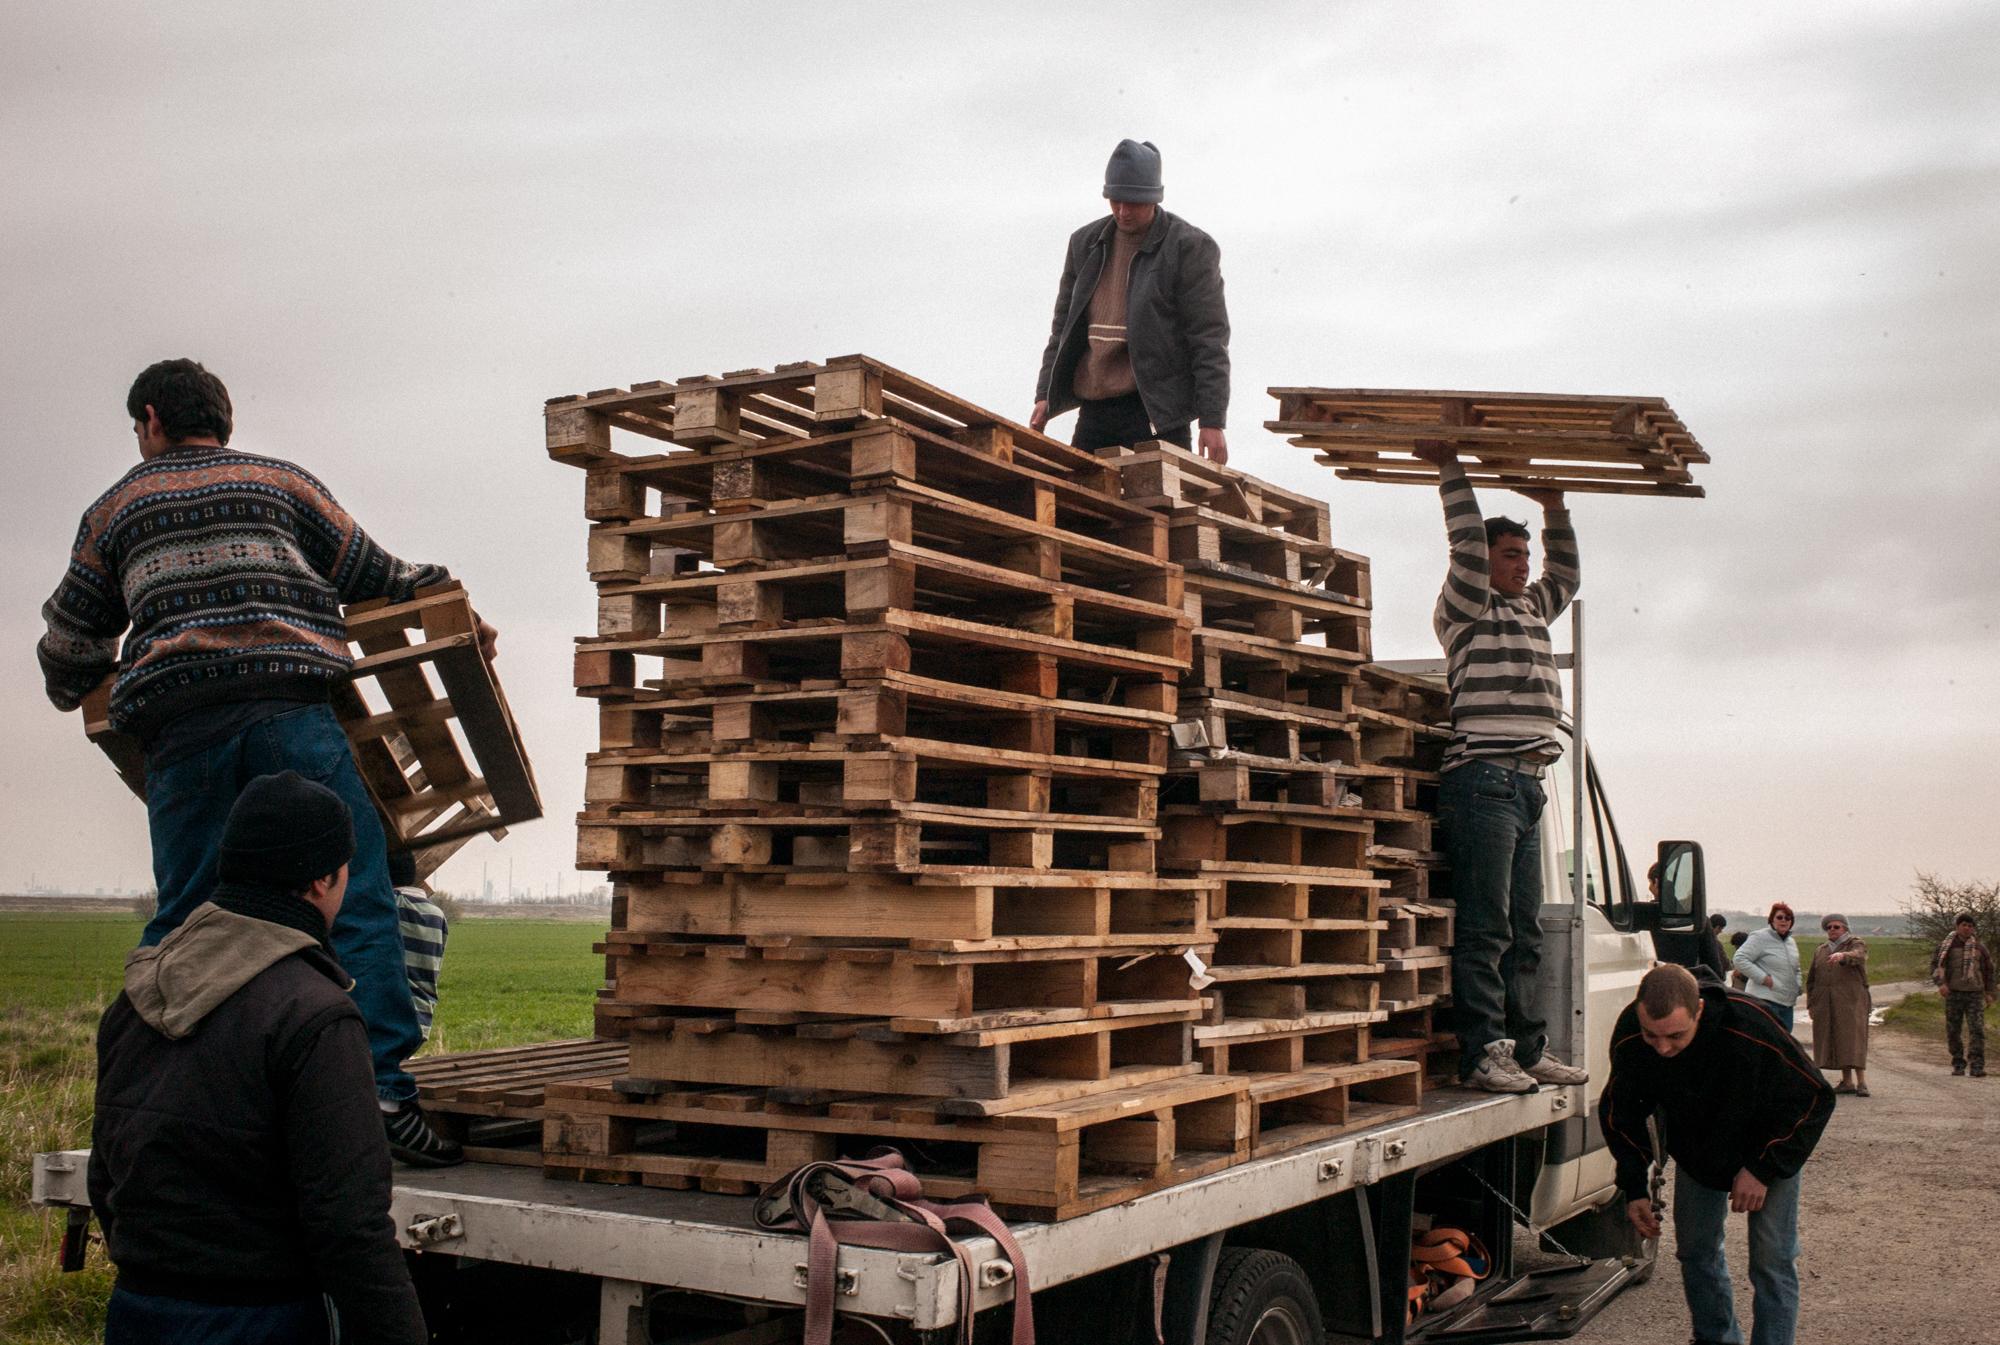 Migrants in Calais, France (2008) - Kurdish and Afghan immigrants receive weekly wood supply...